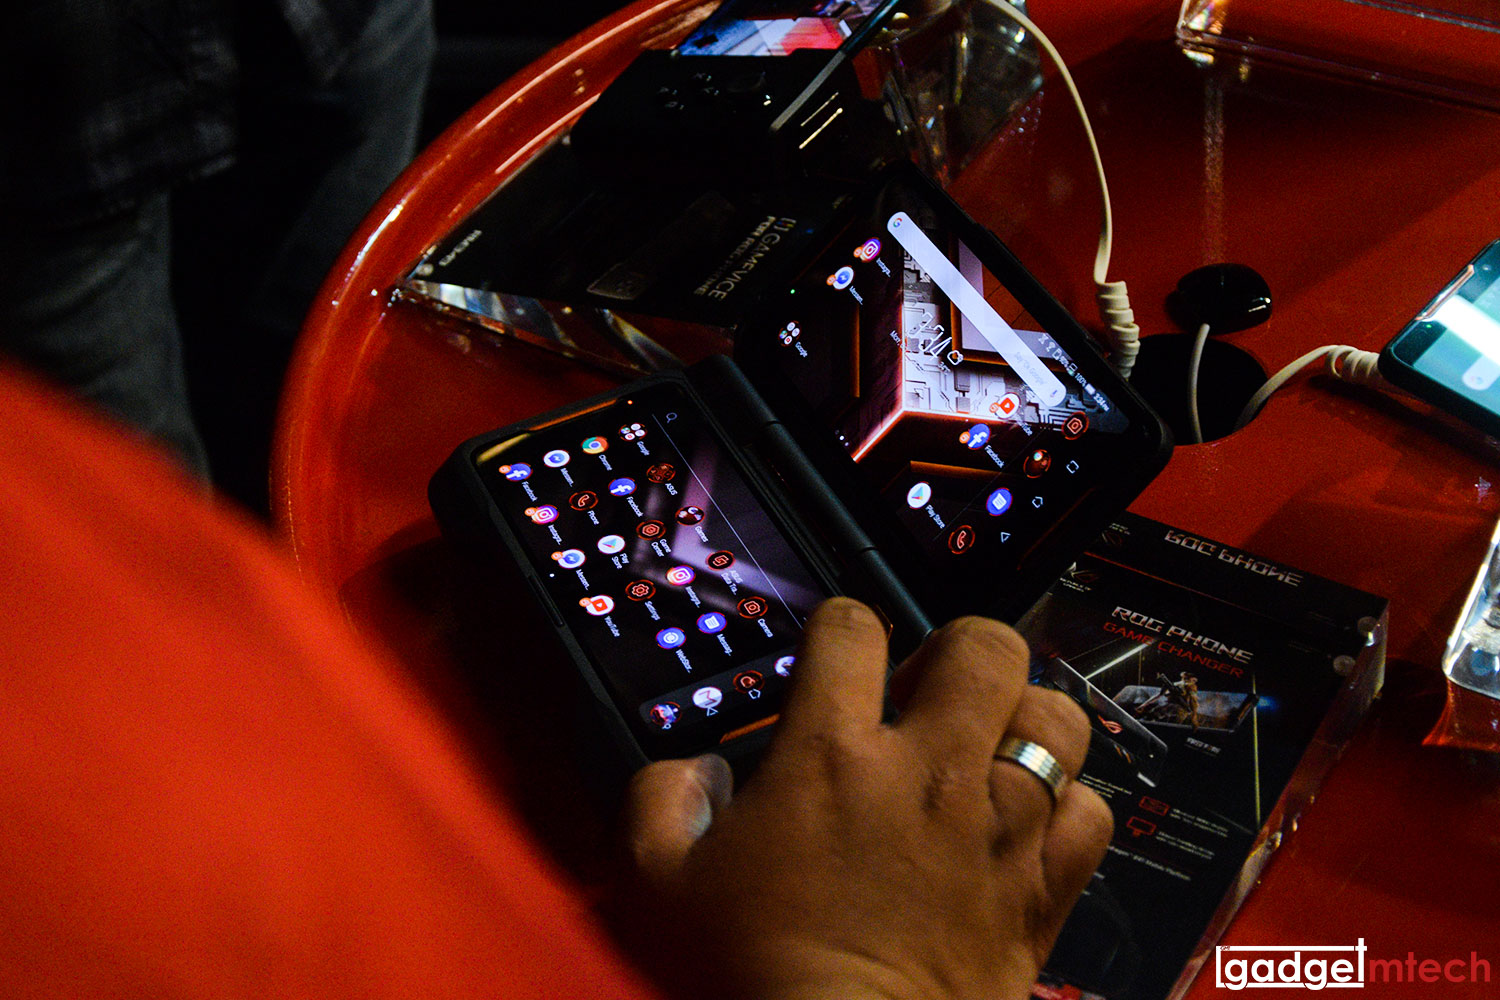 ASUS ROG Phone Hands-On_6